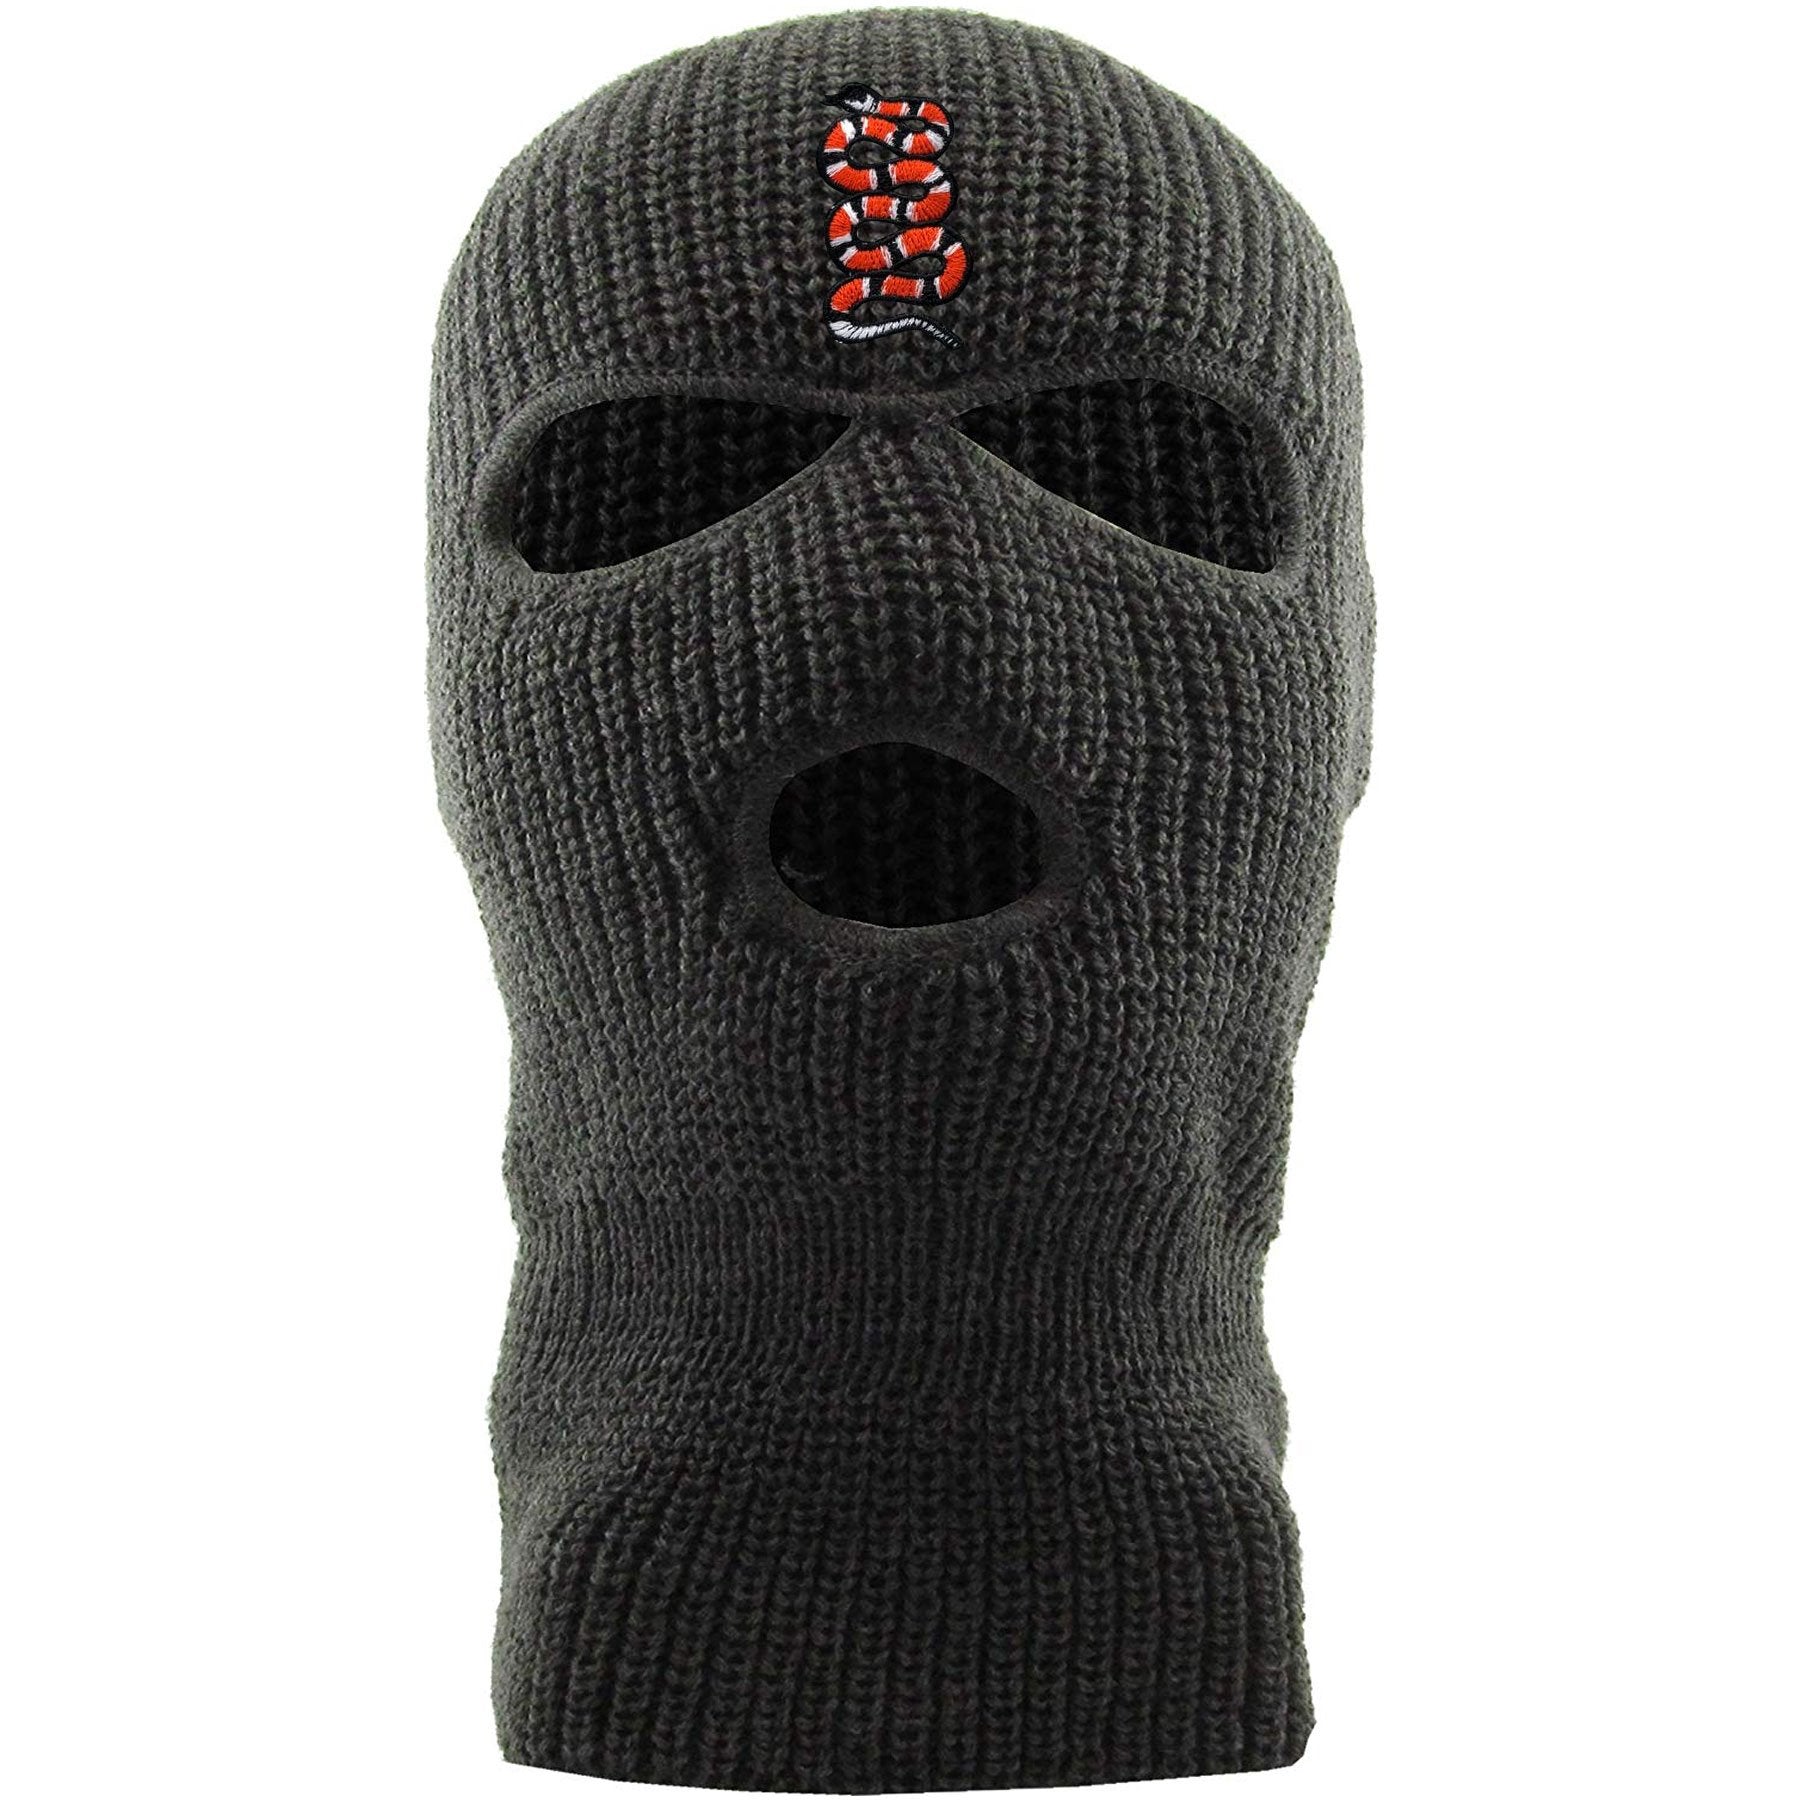 Embroidered on the forehead of the dark gray coiled snake ski mask is the snake logo in red, white, and black